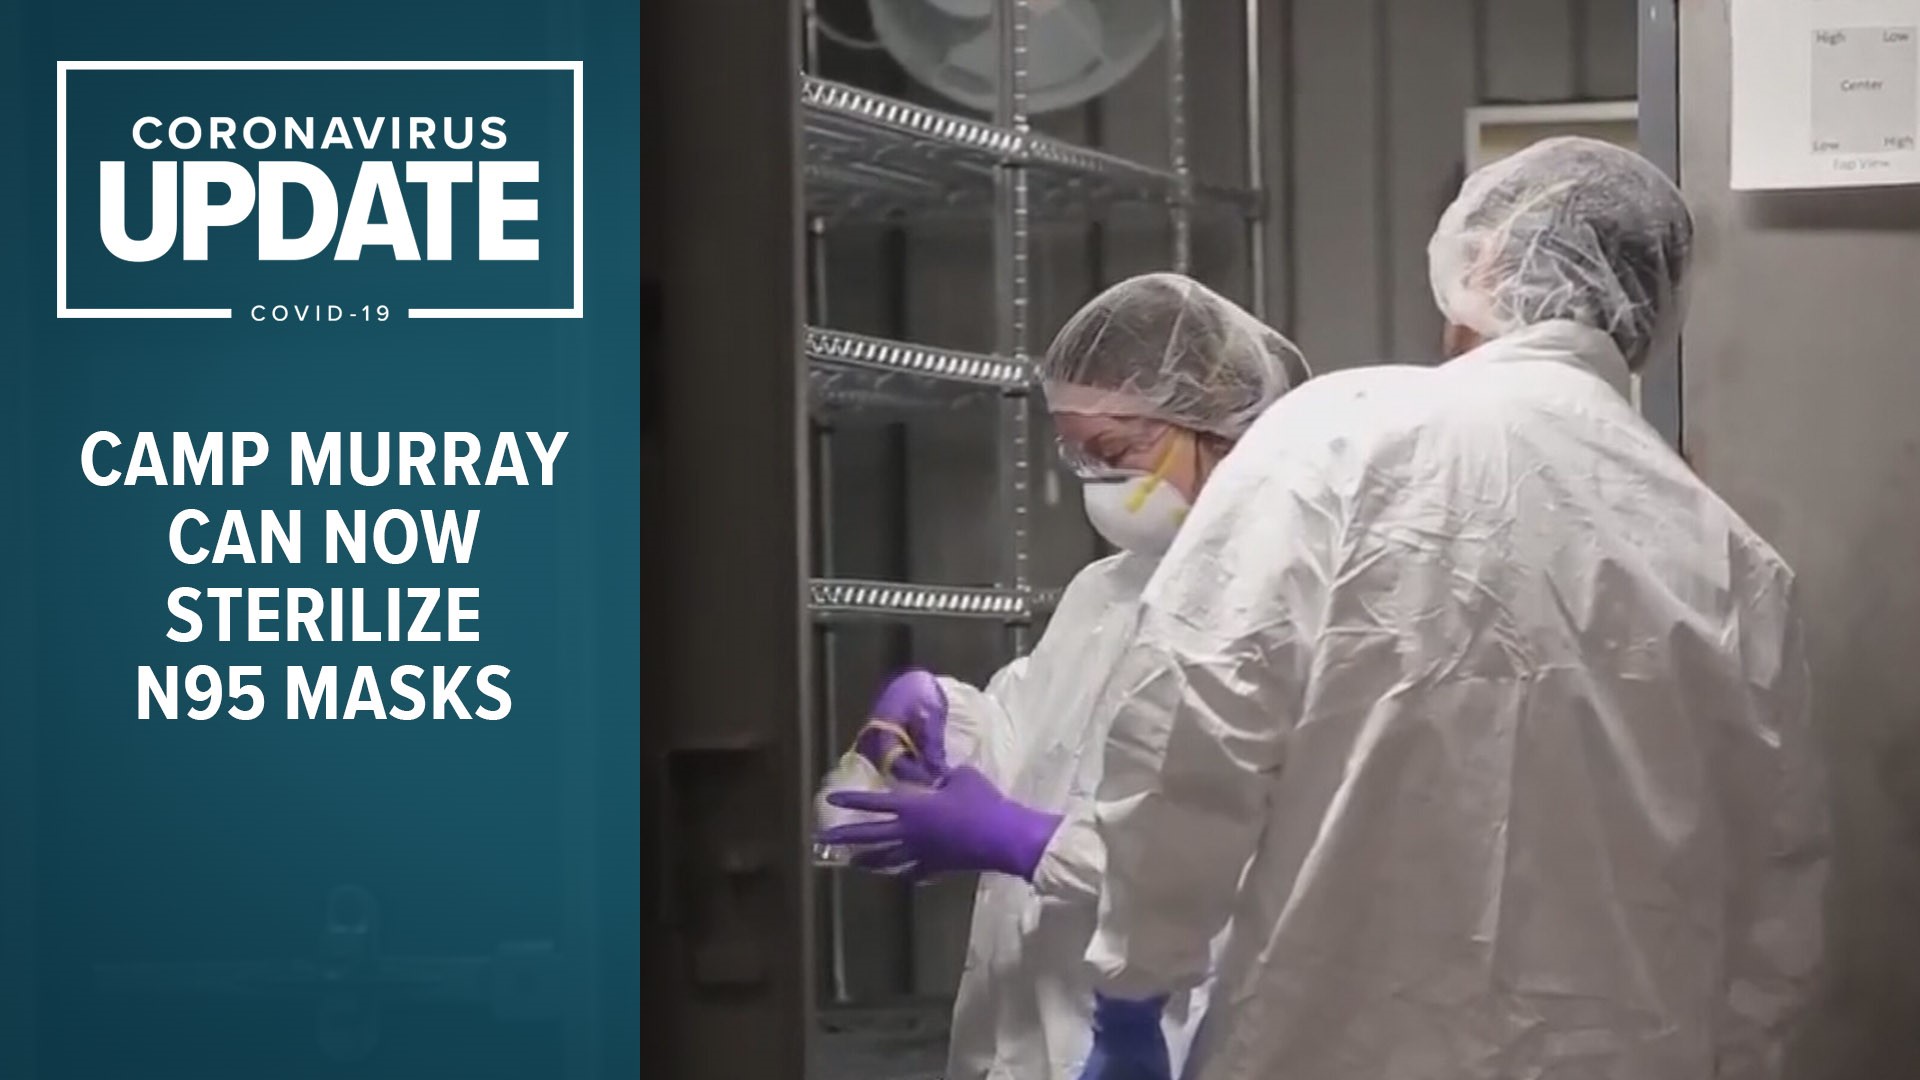 The new system, located at Camp Murray, should be able to contaminate up to 80,000 N95 masks a day starting this week.